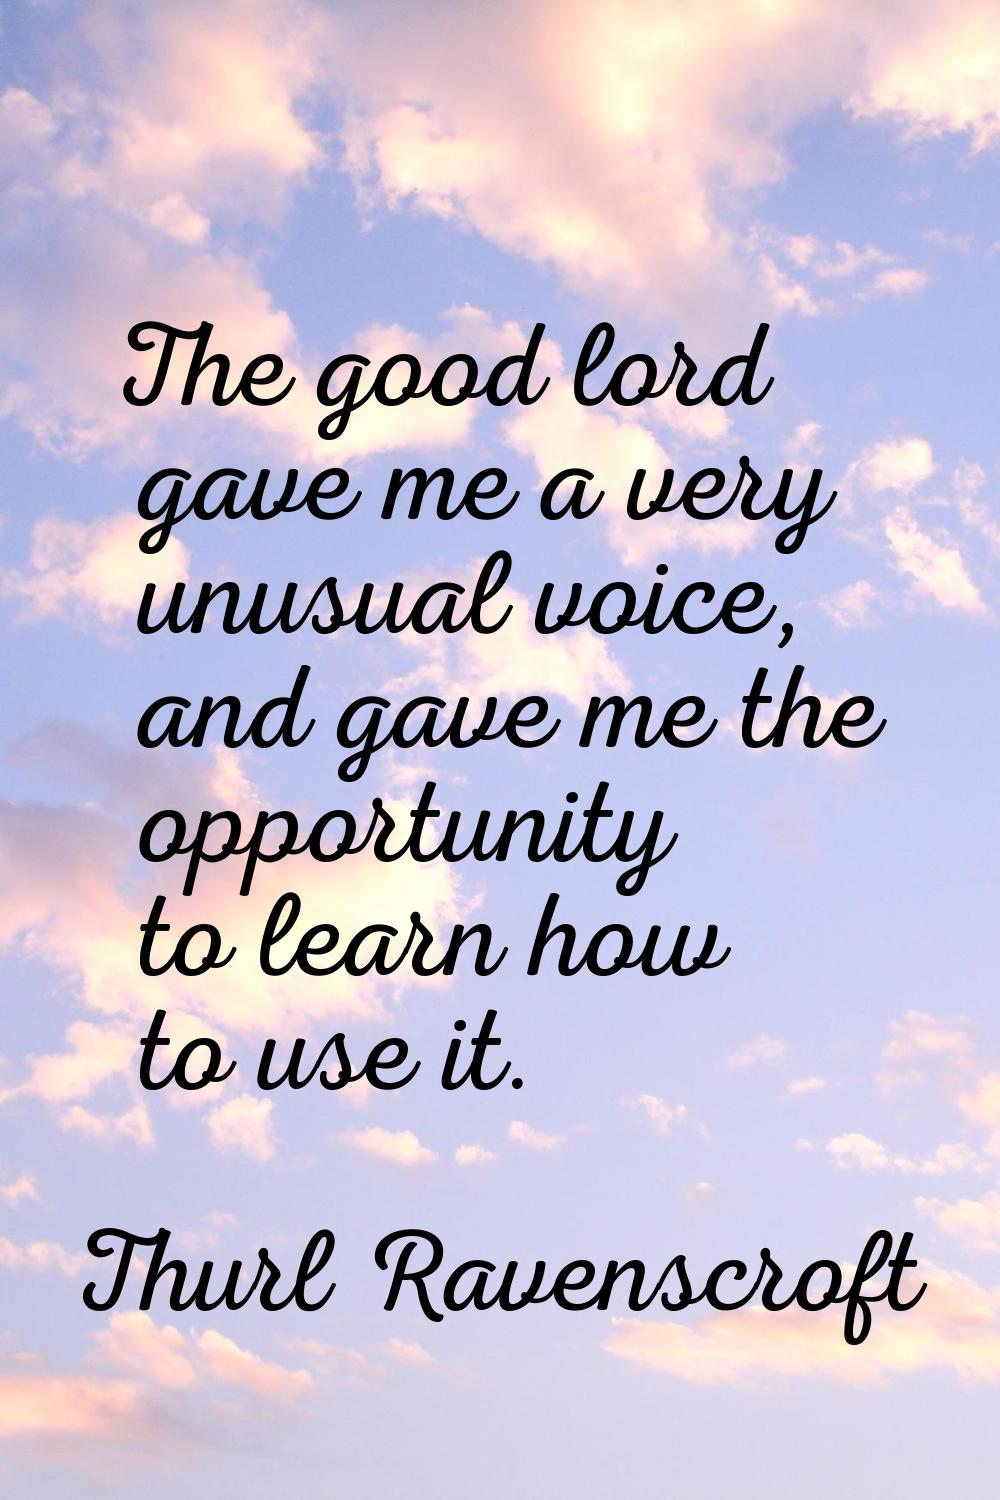 The good lord gave me a very unusual voice, and gave me the opportunity to learn how to use it.